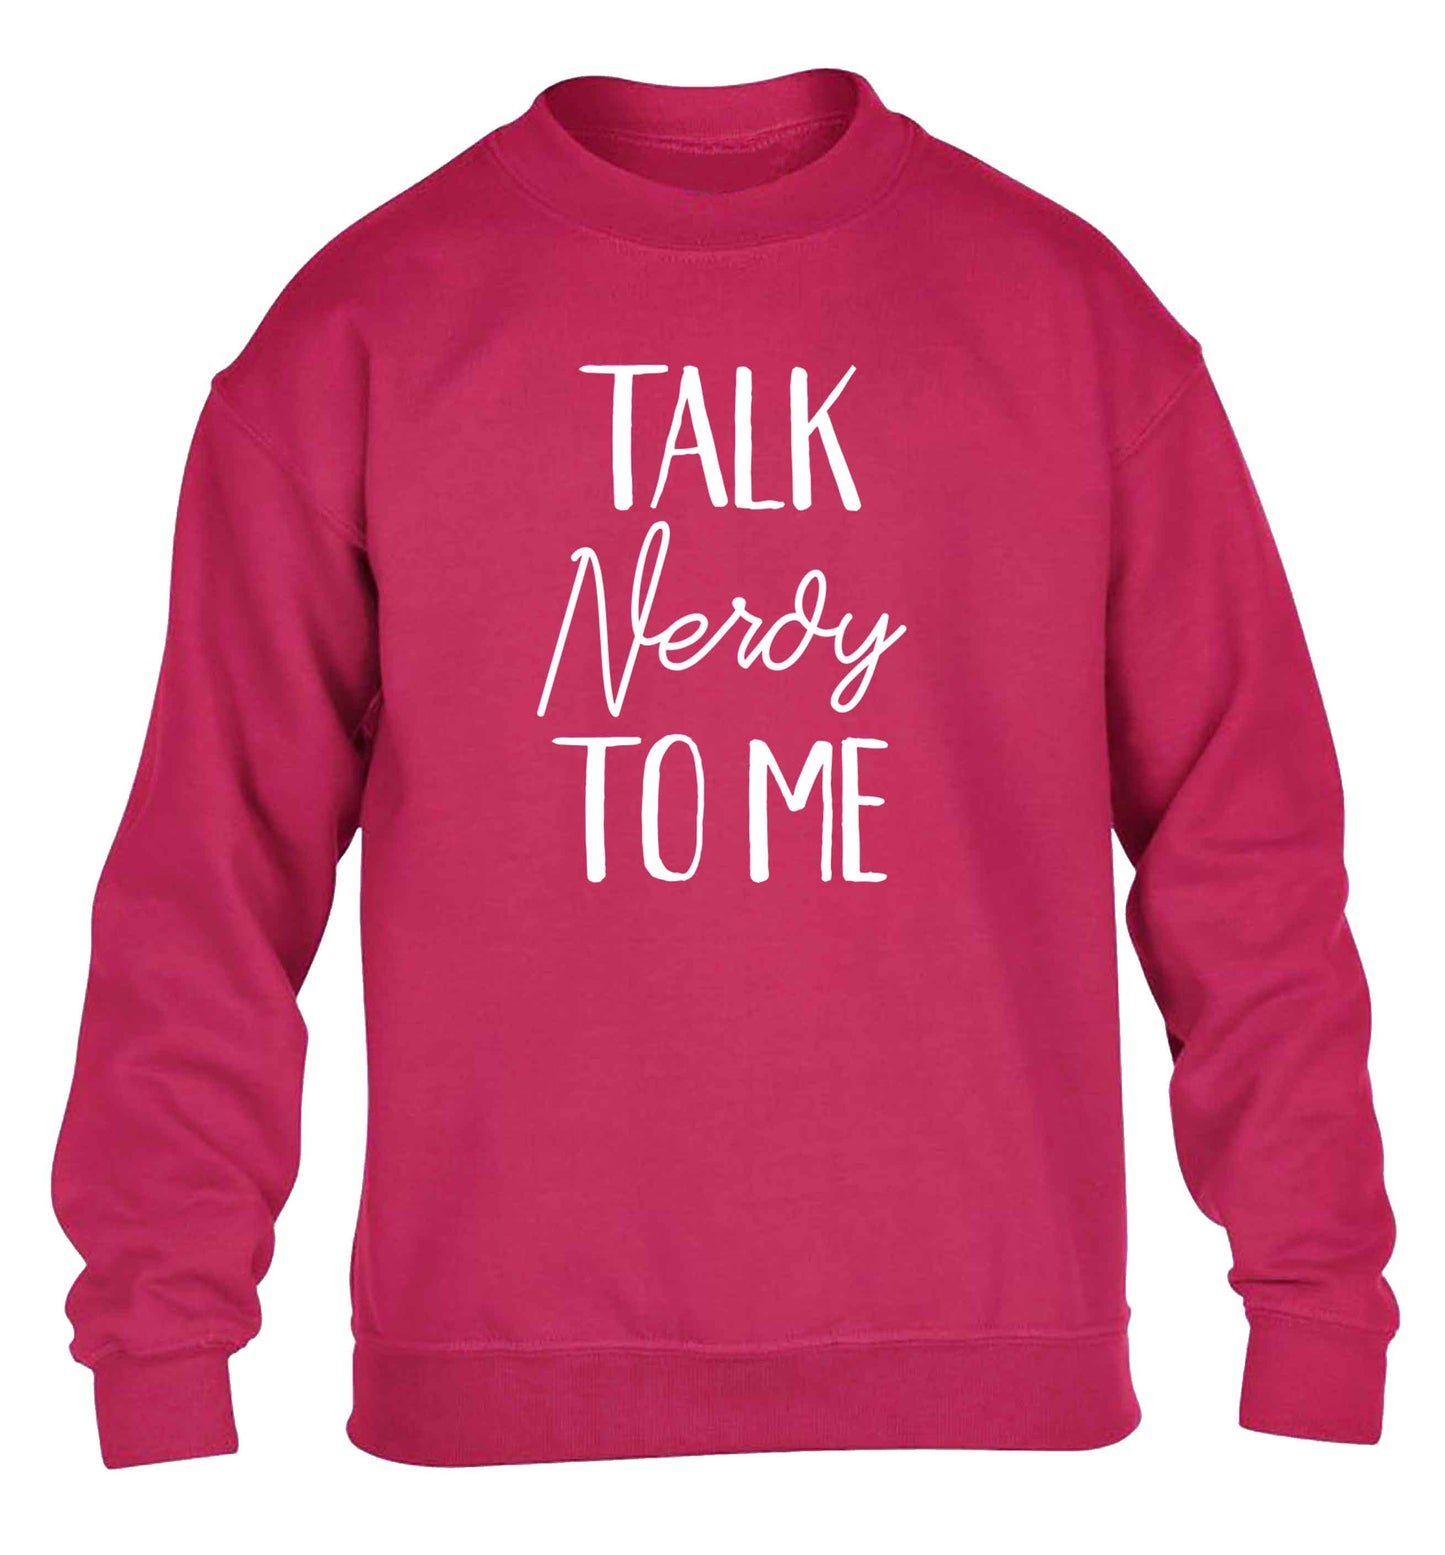 Talk nerdy to me children's pink sweater 12-13 Years